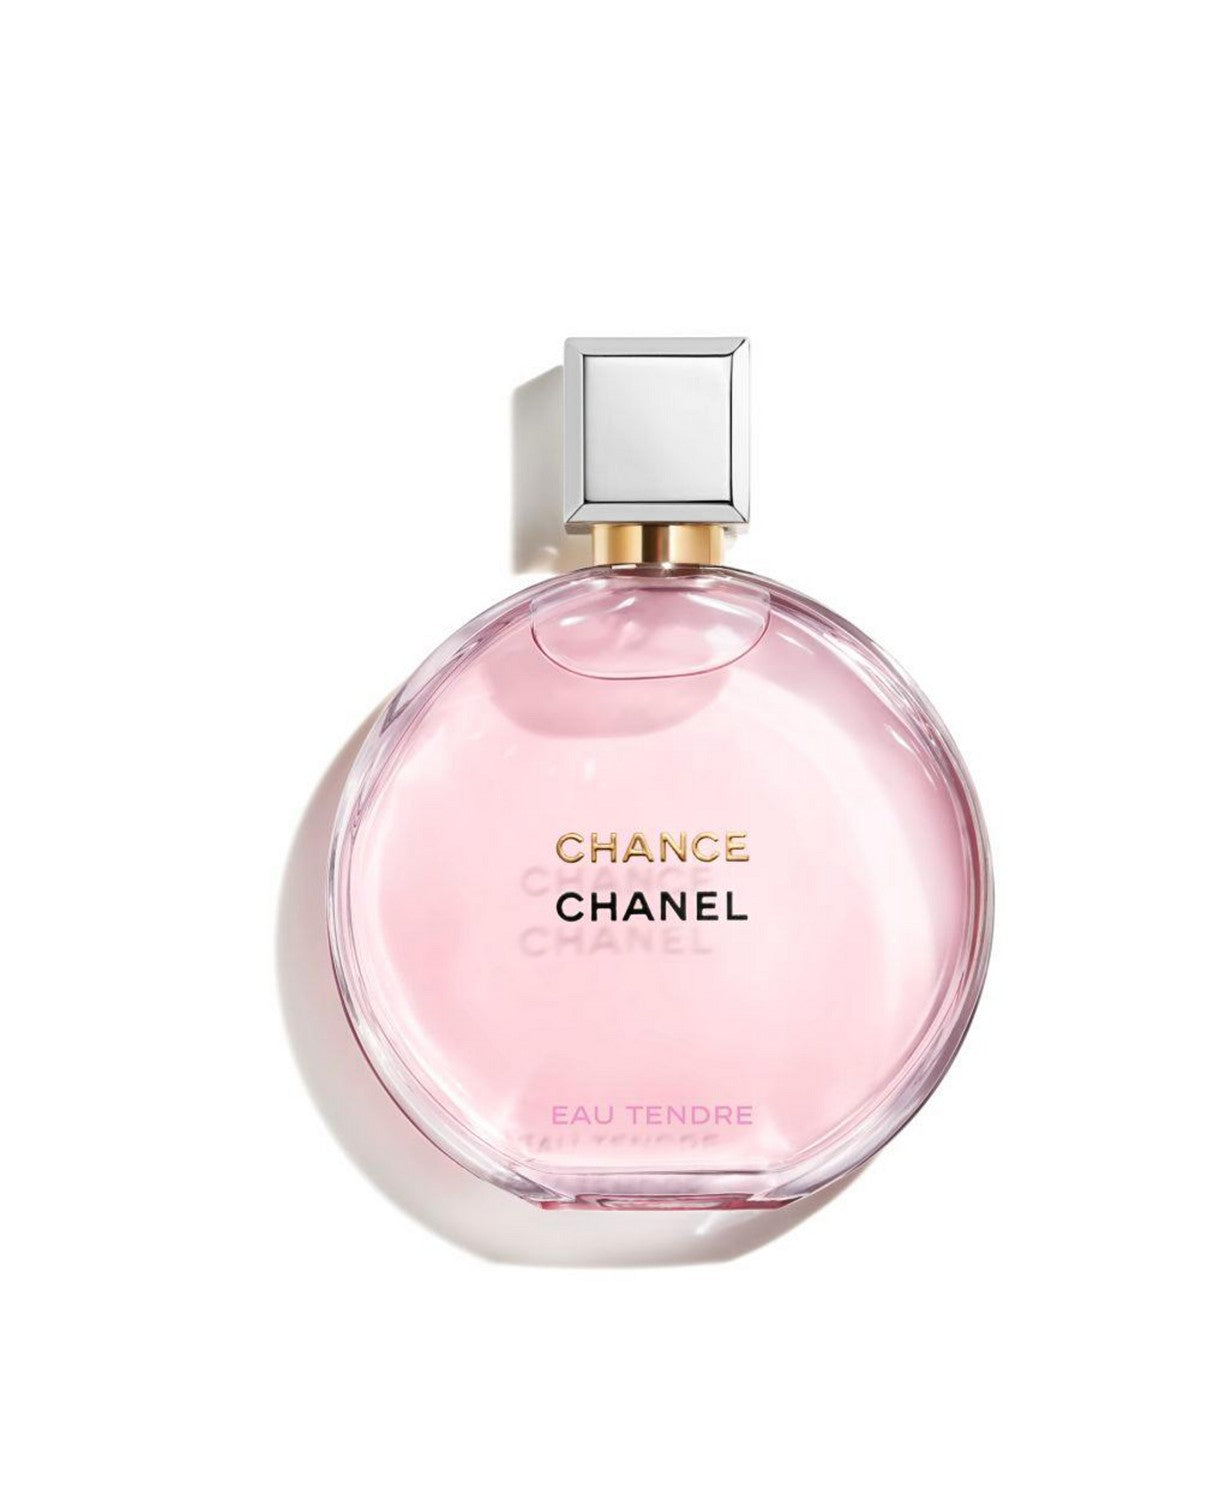 Chanel Chance Eau Tendre perfumed water for women 1.5 ml with spray, vial -  VMD parfumerie - drogerie